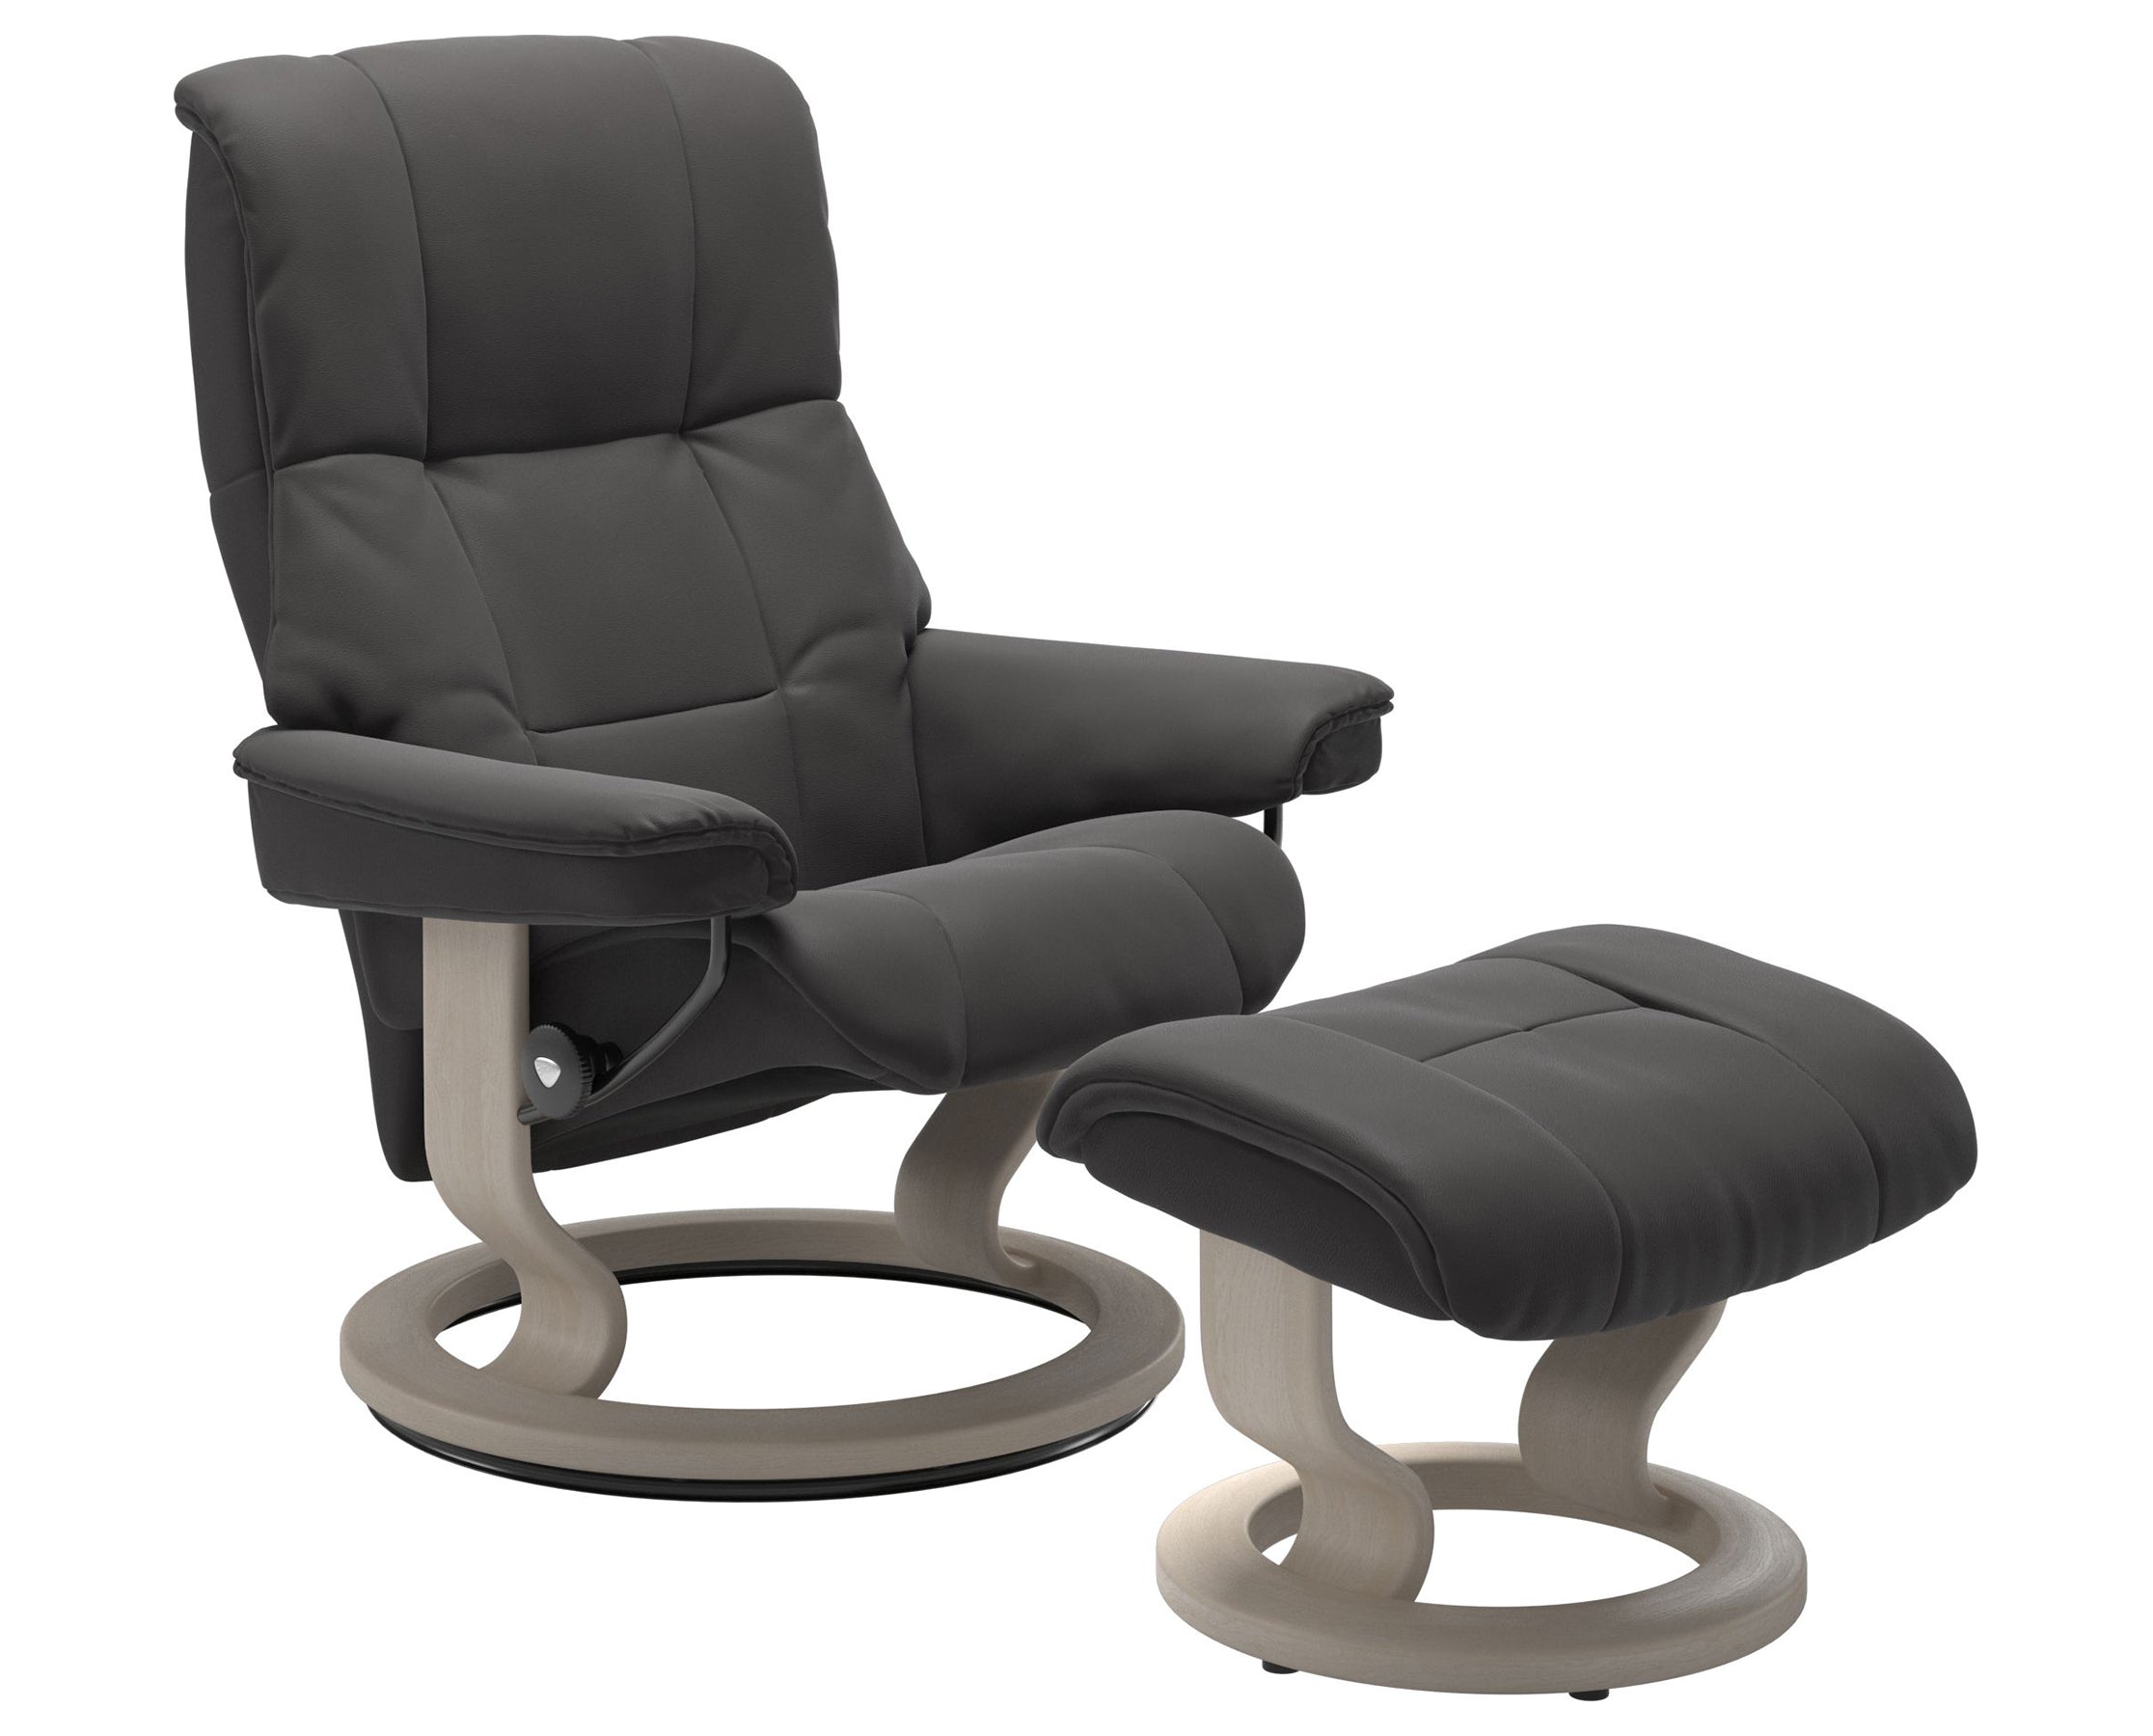 Paloma Leather Rock S/M/L and Whitewash Base | Stressless Mayfair Classic Recliner | Valley Ridge Furniture